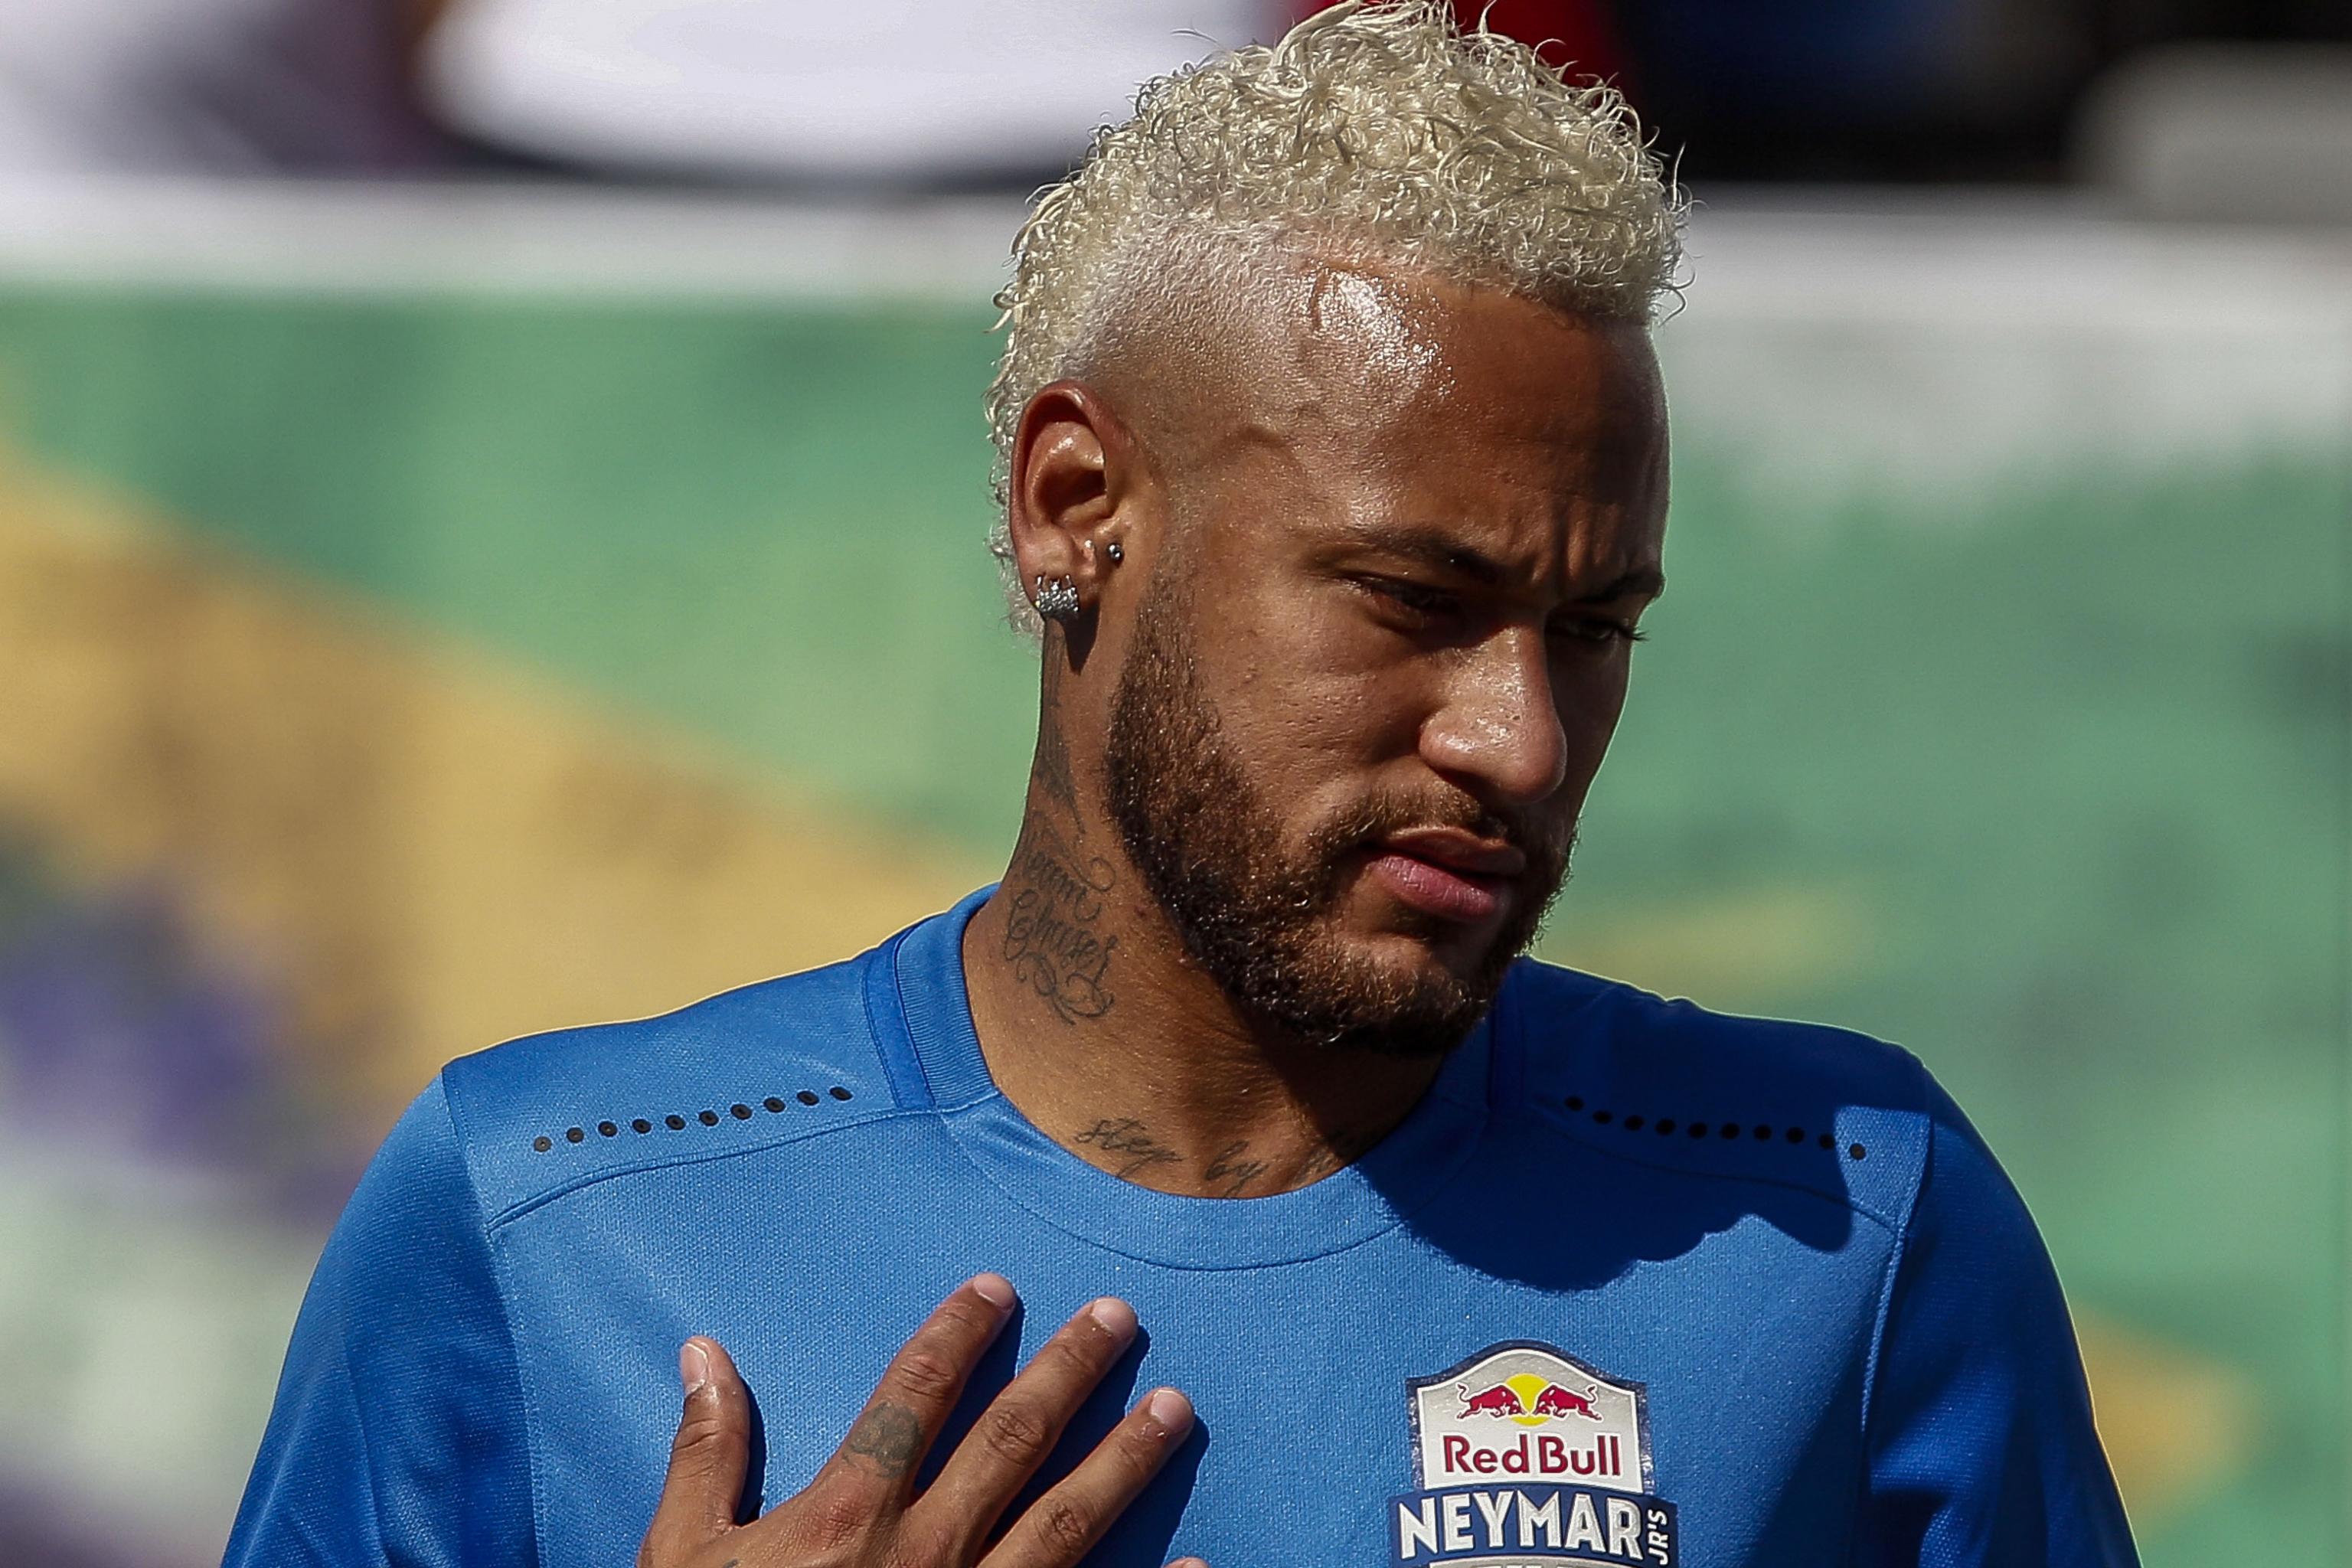 Neymar can leave 'if offer suits', says PSG sporting director